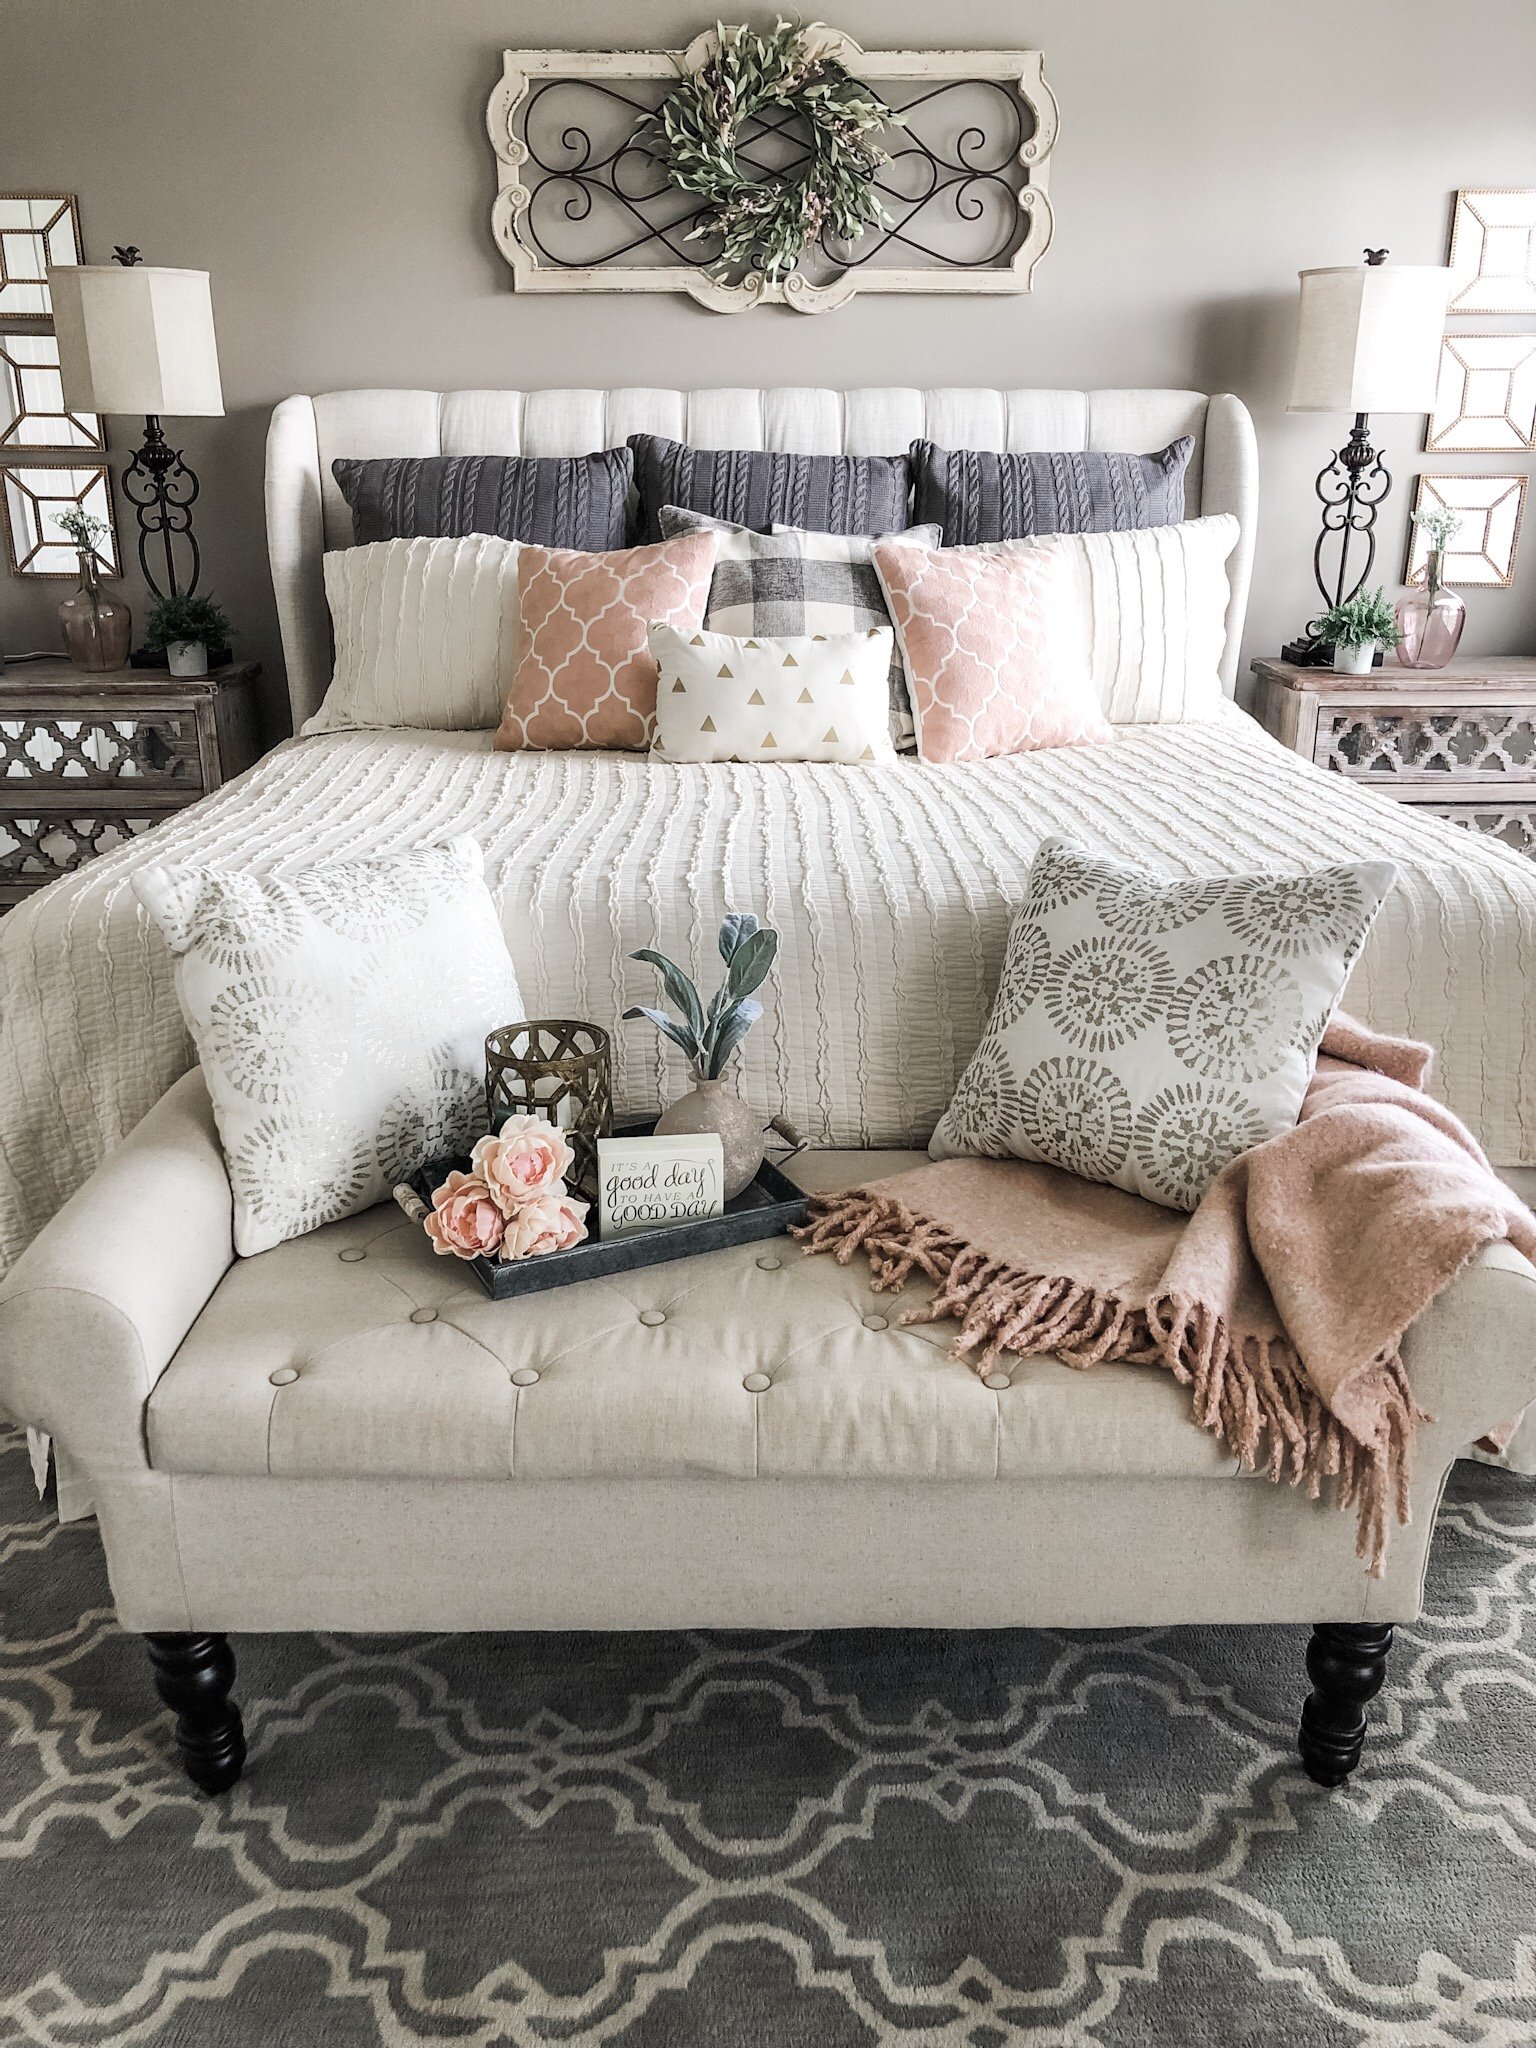 Simple Ideas For Adding Blush Accents To Your Decor My Master Bedroom For Spring Wilshire Collections